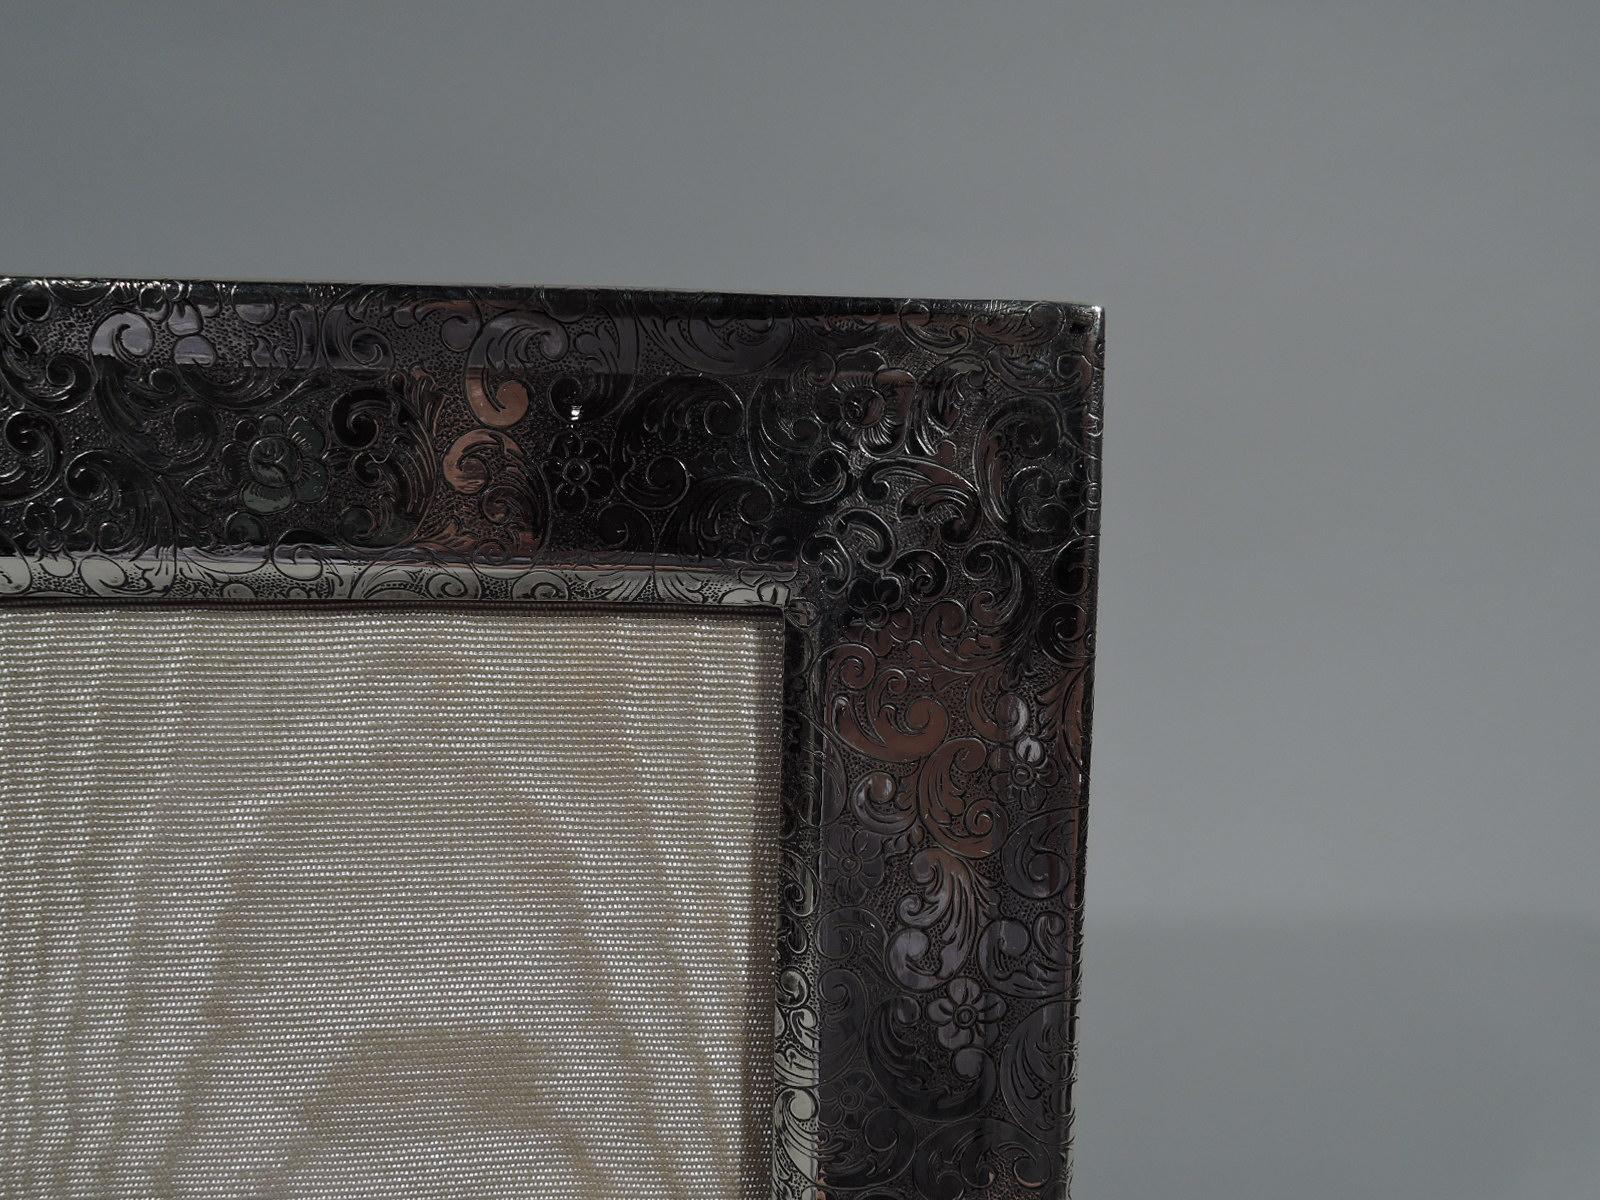 Gorgeous Art Nouveau sterling silver picture frame. Rectangular window and flat surround with beveled rims and dense, slightly hallucinatory acid-etched scrolls and flowers. With glass, silk lining, and velvet back and hinged support for portrait